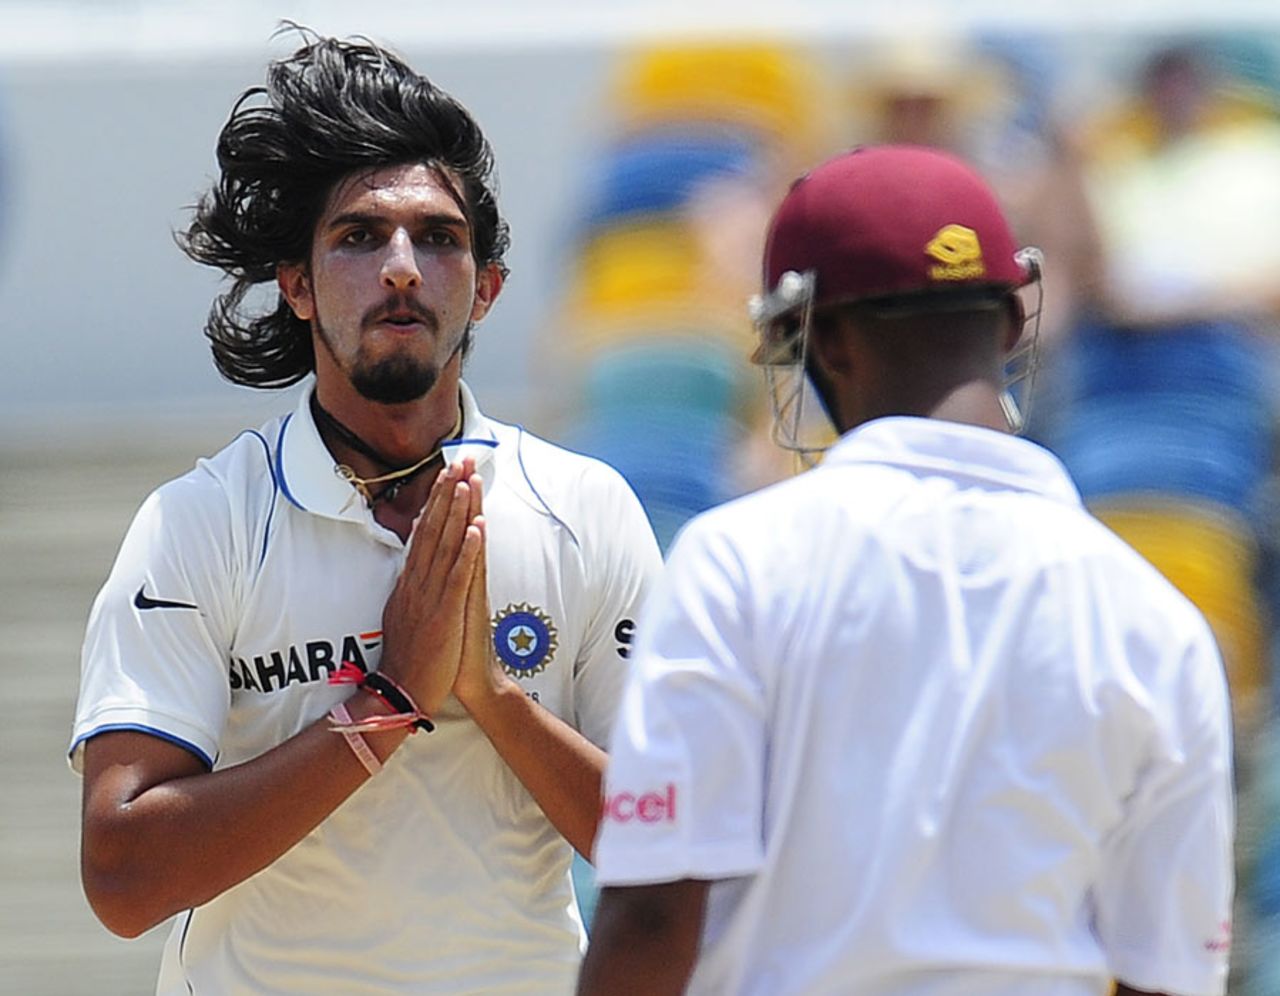 Ishant Sharma sent back Lendl Simmons for 14, West Indies v India, 2nd Test, Bridgetown, 5th day, July 2, 2011 